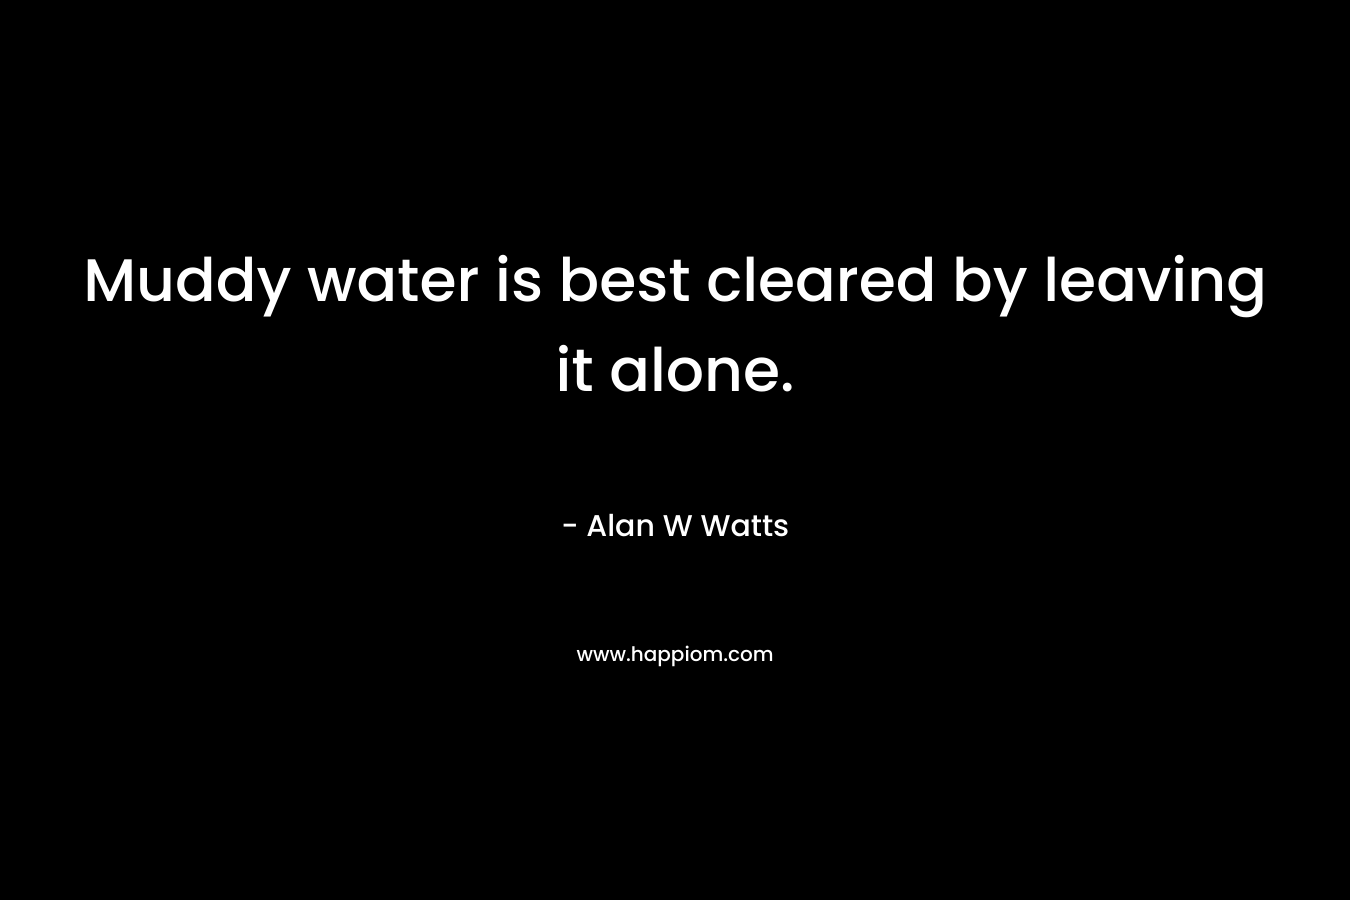 Muddy water is best cleared by leaving it alone.